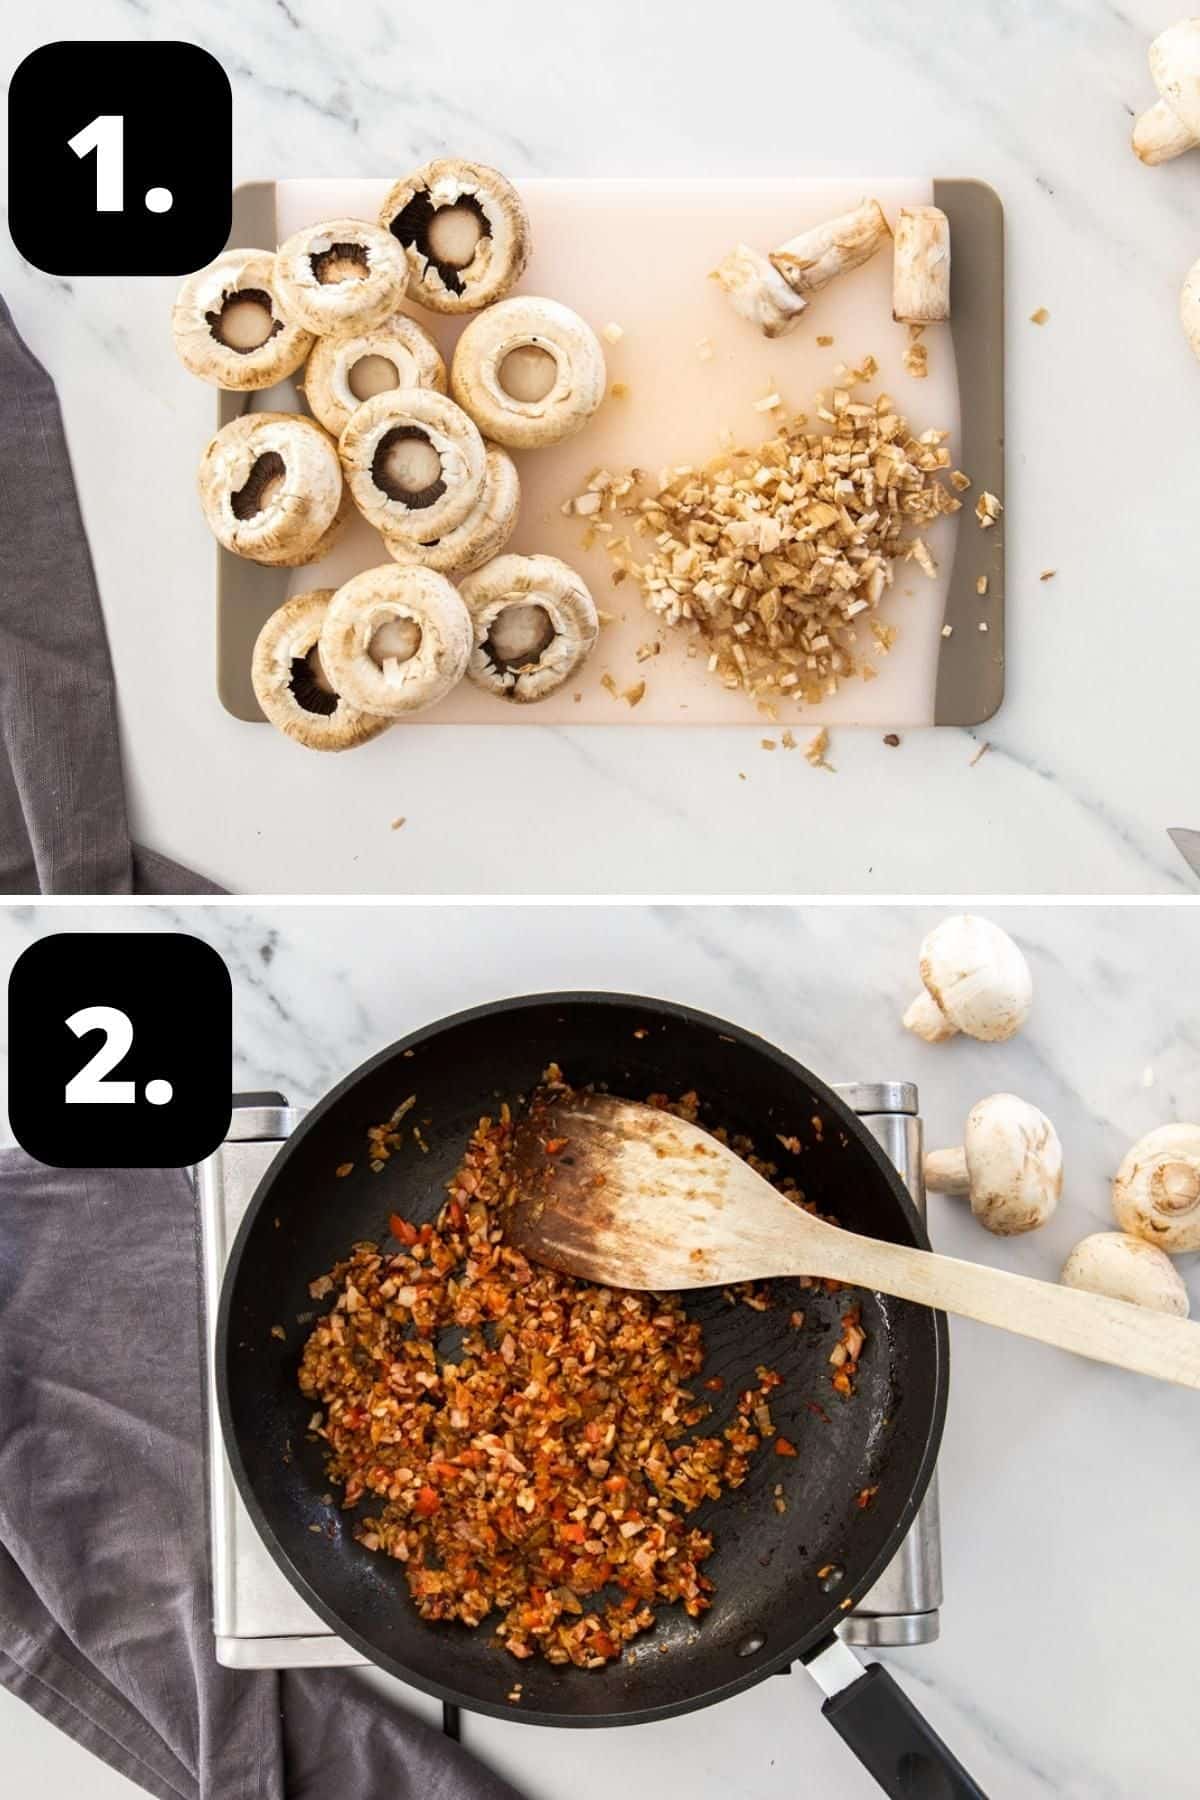 Steps 1-2 of preparing this recipe - removing the stem from the mushrooms and frying the ingredients for the filling.